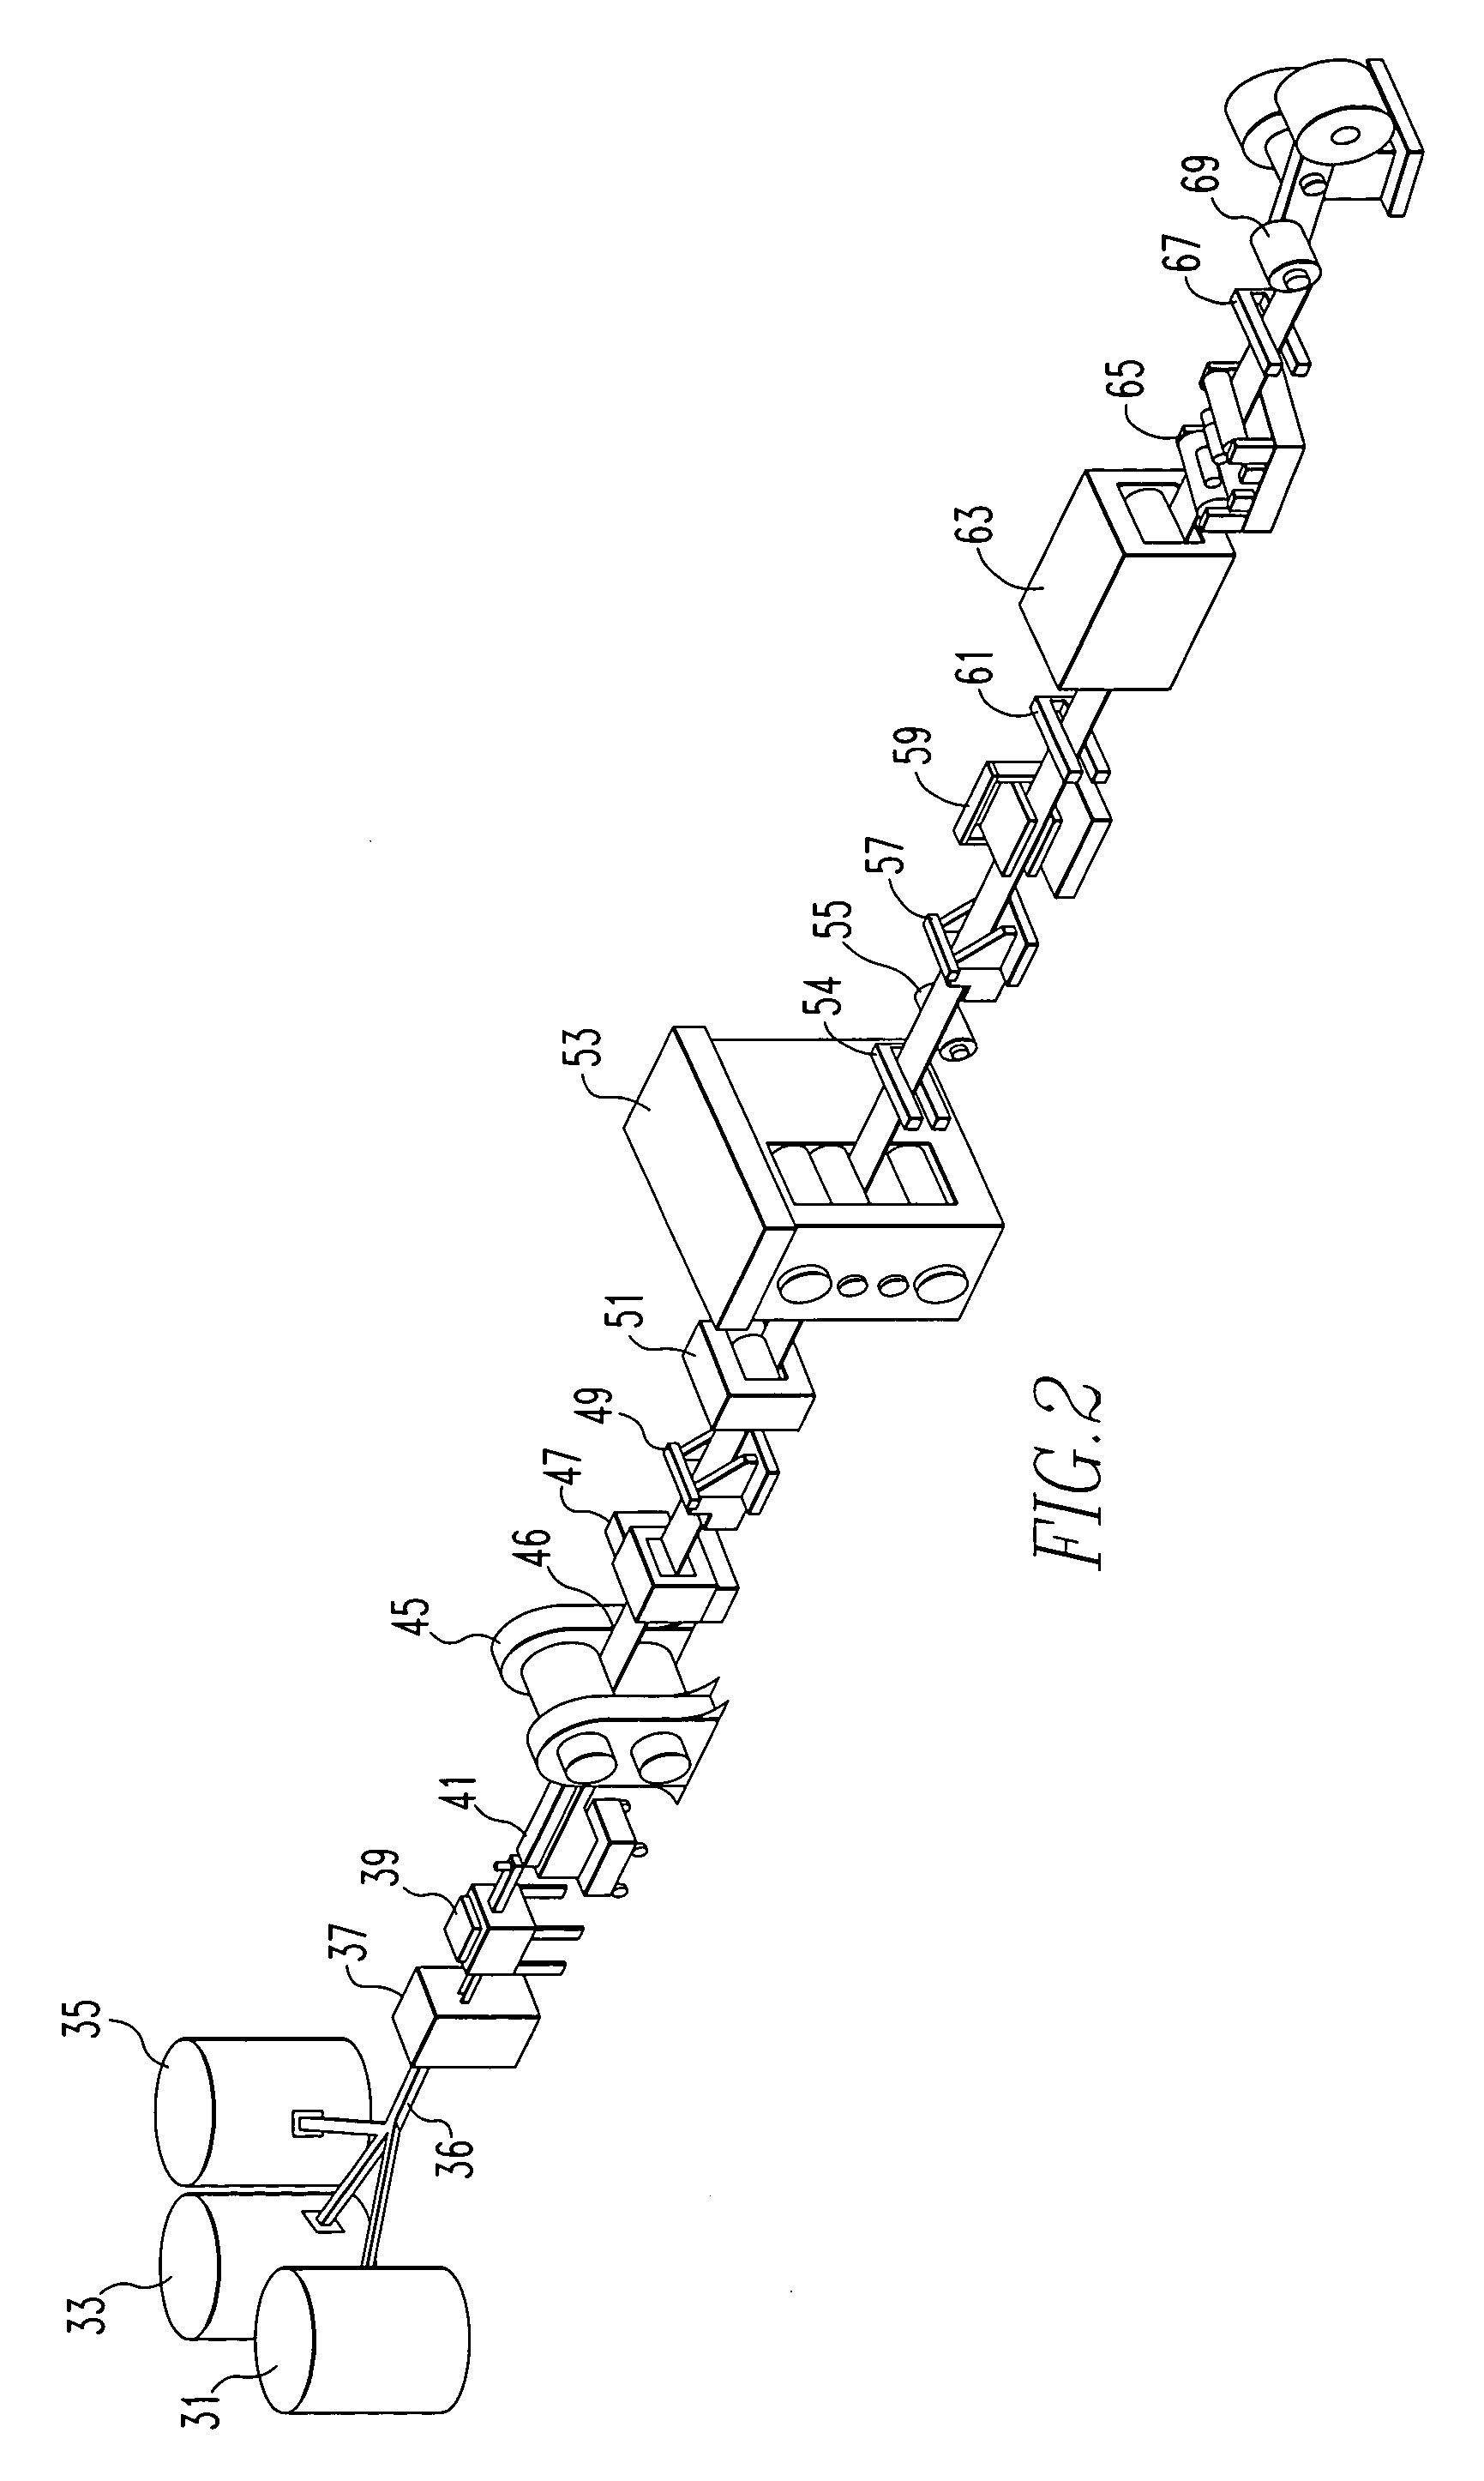 In-line method of making heat-treated and annealed aluminum alloy sheet